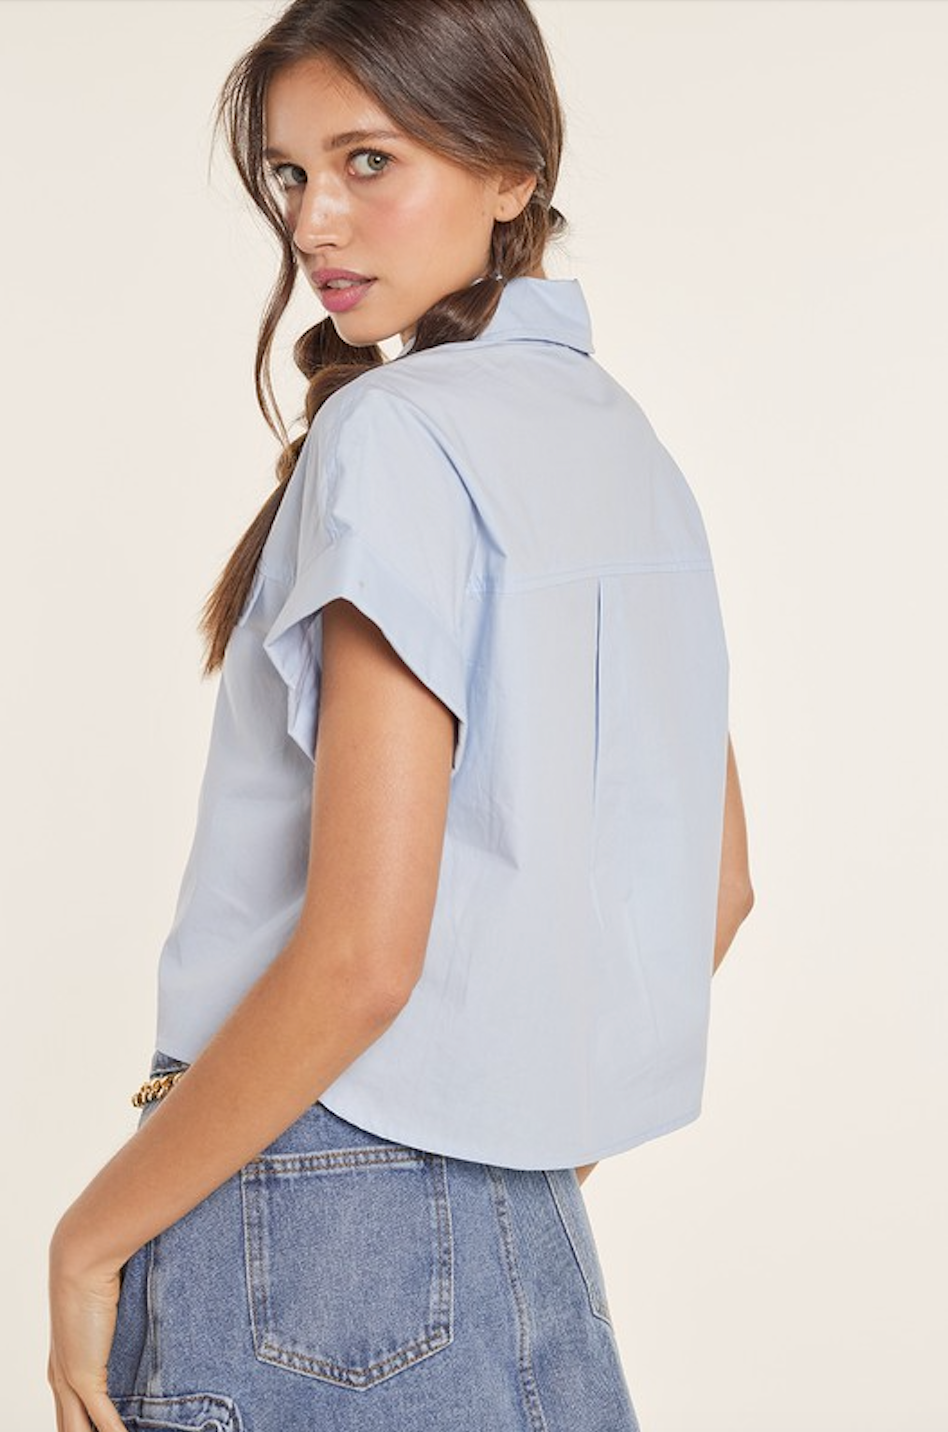 CLAIRE DROP SHOULDER ROLL UP BUTTON UP SHIRT IN LIGHT BLUE